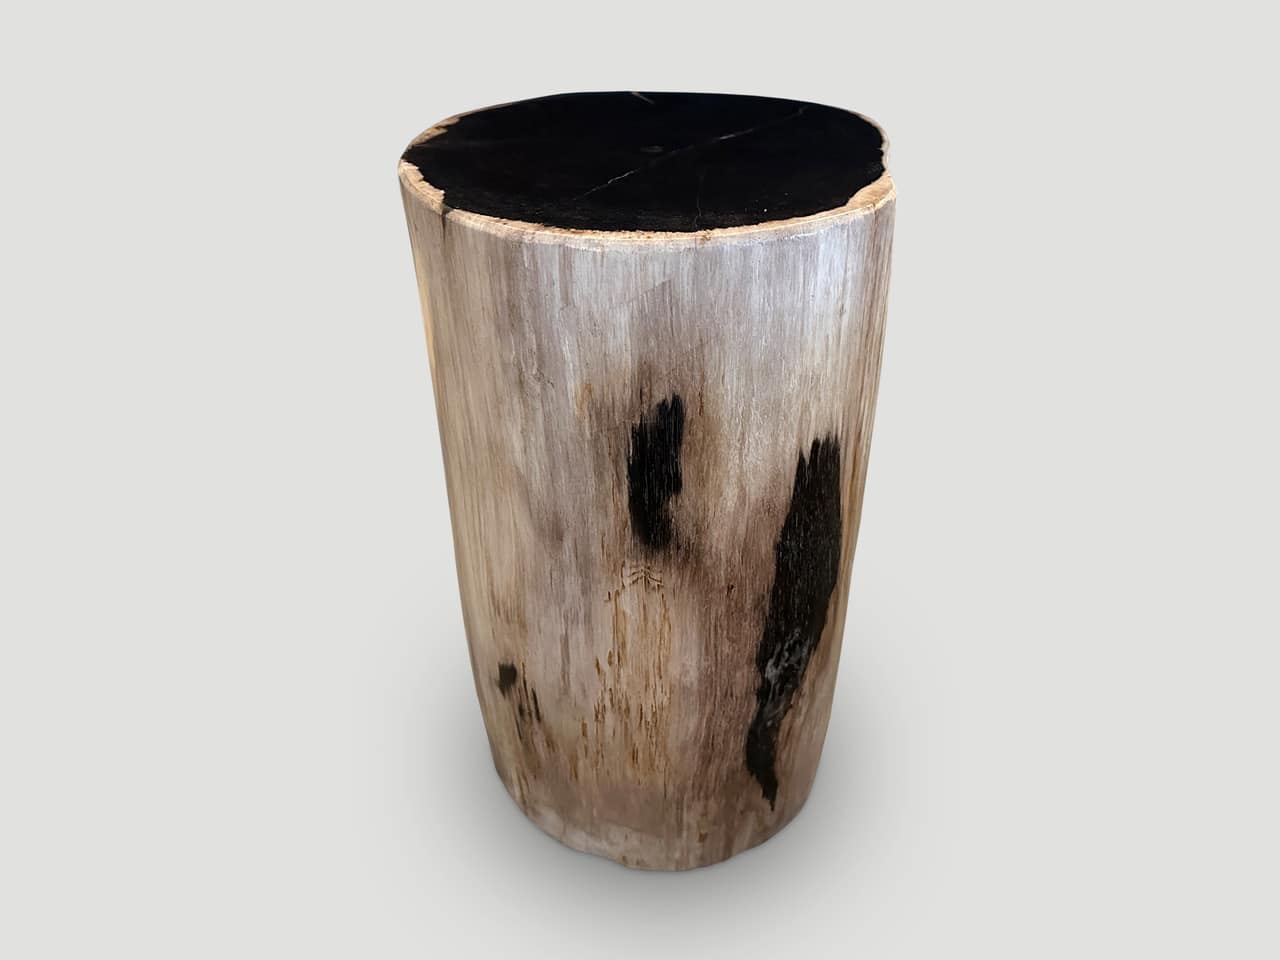 SUPER SMOOTH HIGH QUALITY PETRIFIED WOOD SIDE TABLE